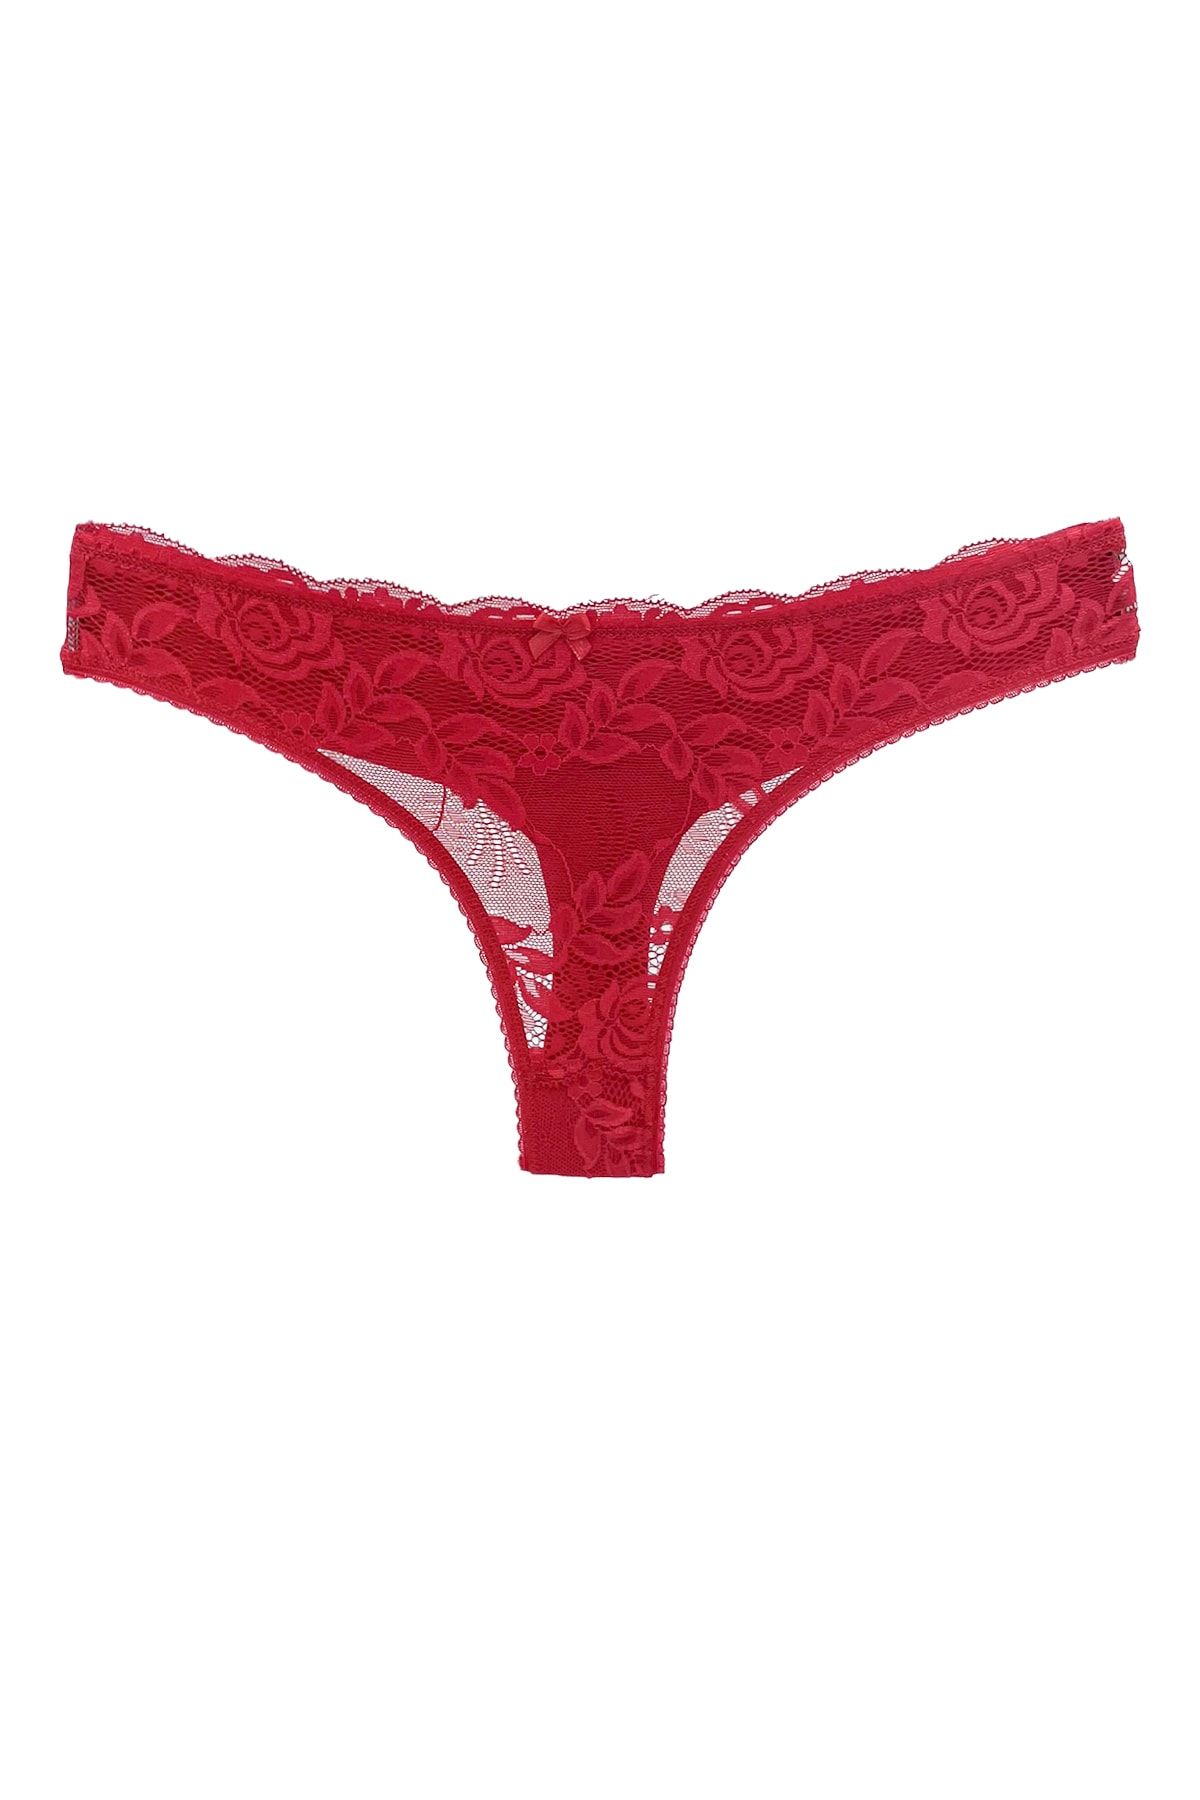 HNX Red Front Lace Back Double Layer Cotton Thong Women's Panties - Trendyol